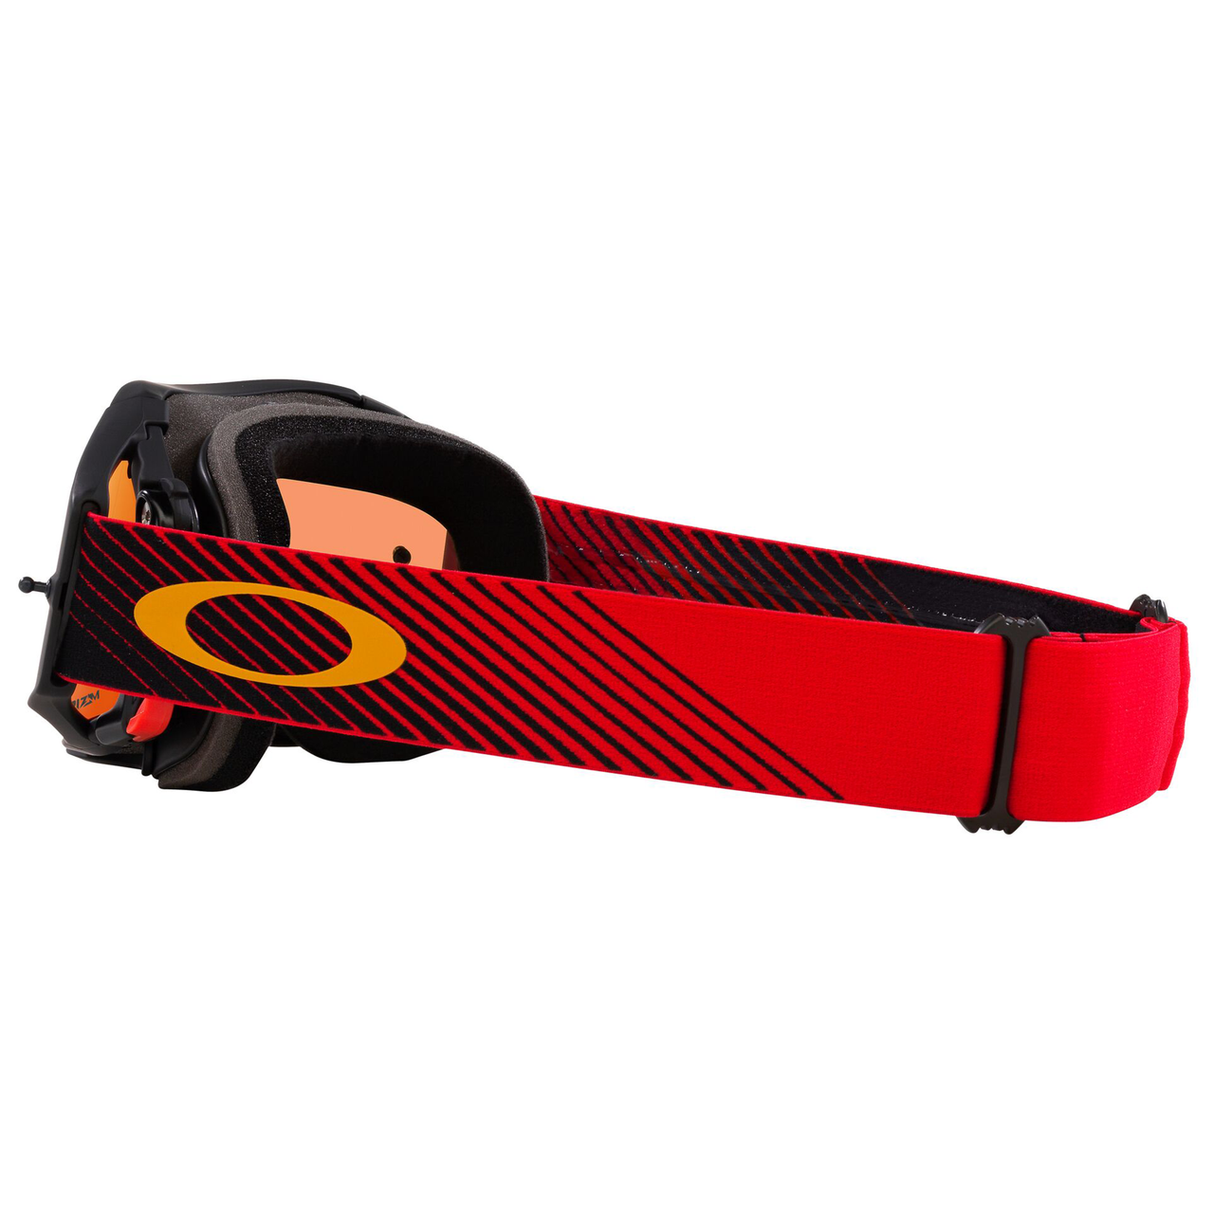 Oakley Airbrake MX Goggle (Red Flow) Prizm MX Torch Lens